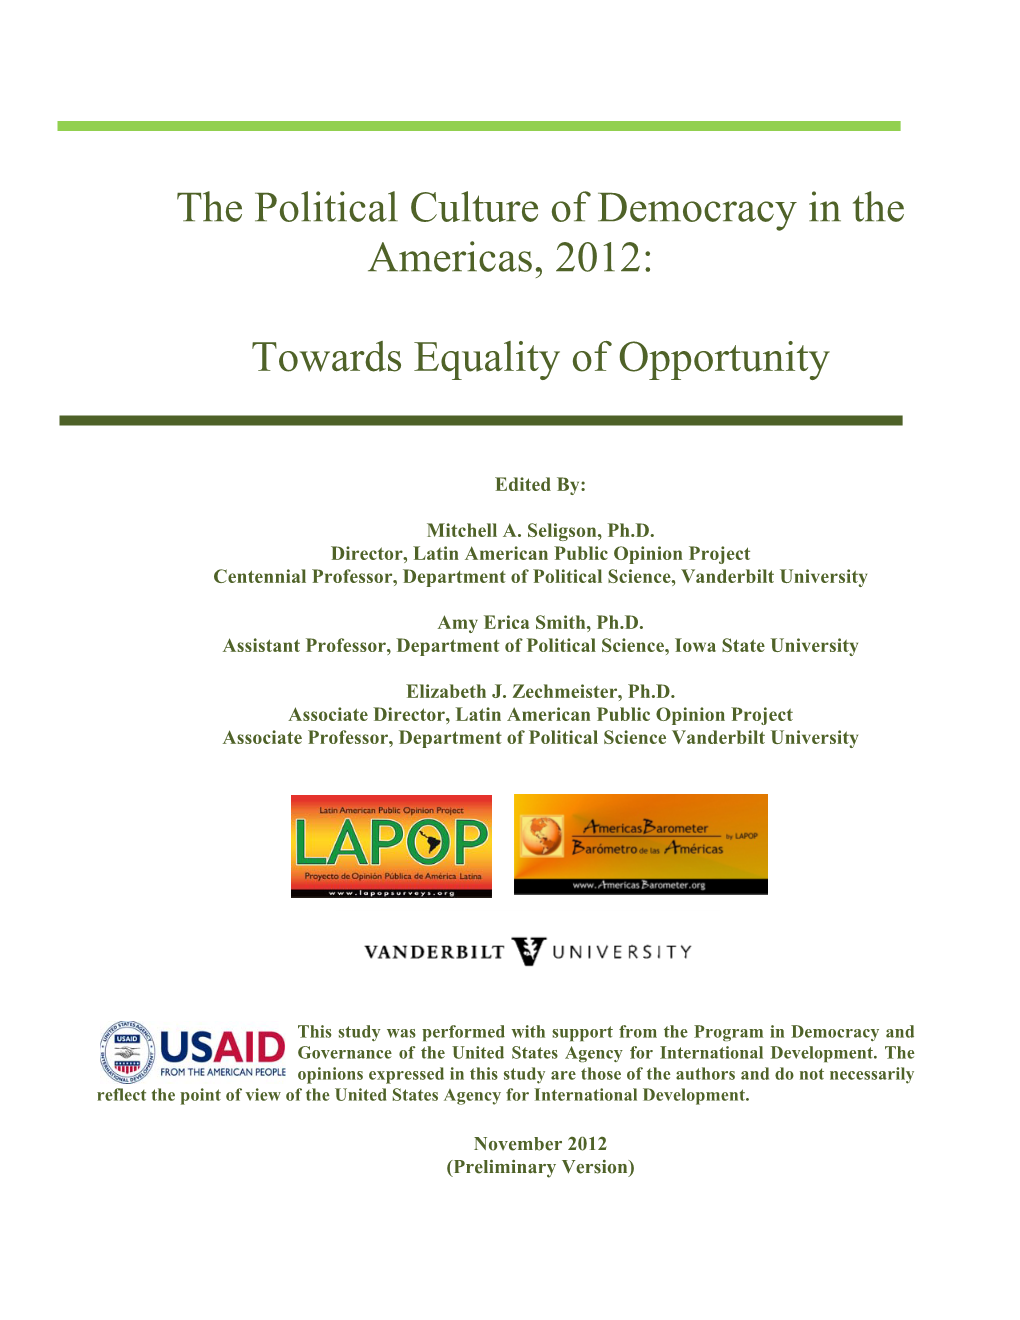 The Political Culture of Democracy in the Americas, 2012